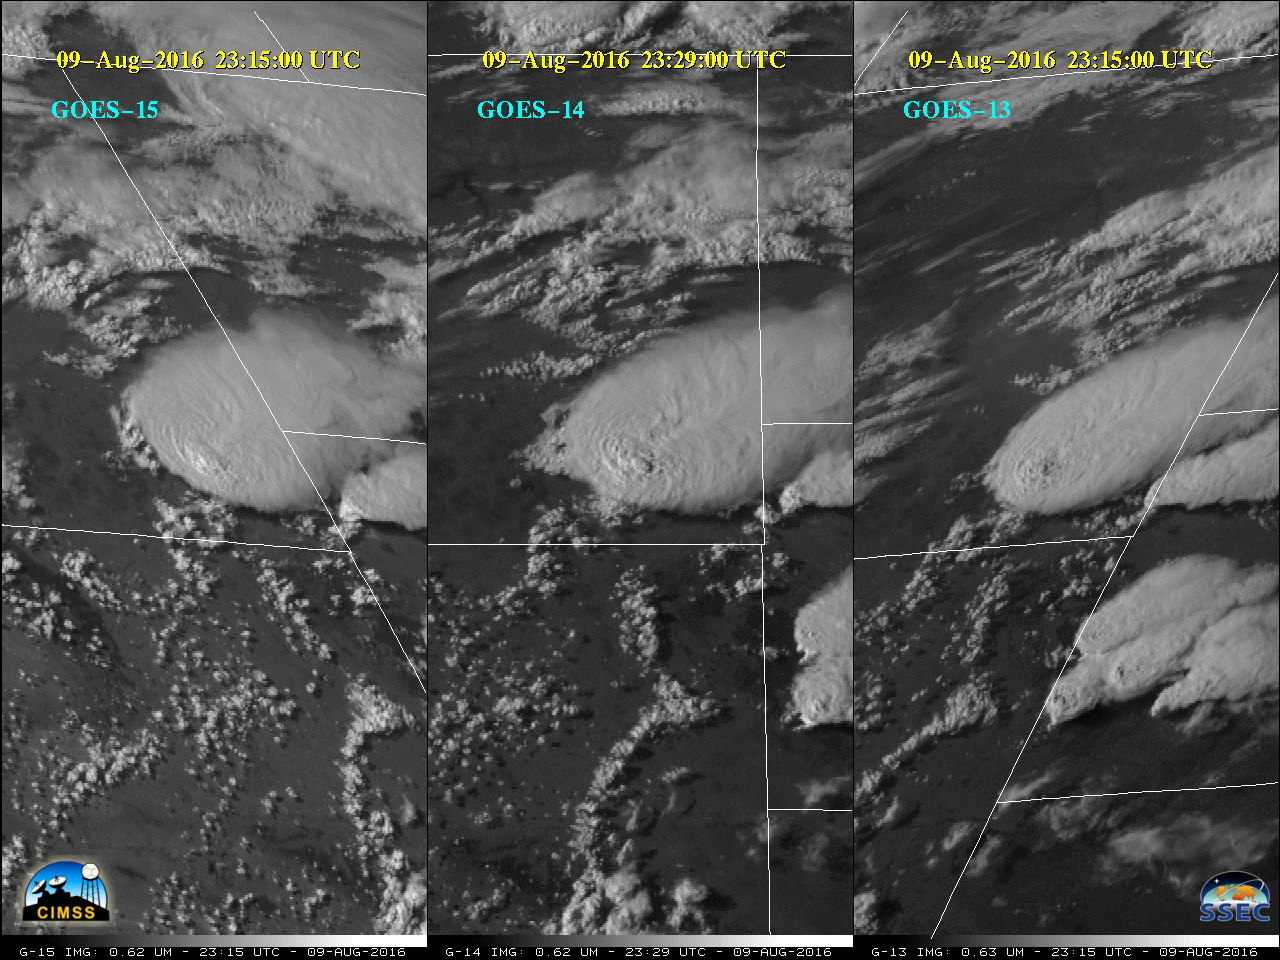 GOES-13 (left), GOES-14 (center) and GOES-13 (right) 0.62 um Visible images [click to play MP4 animation]